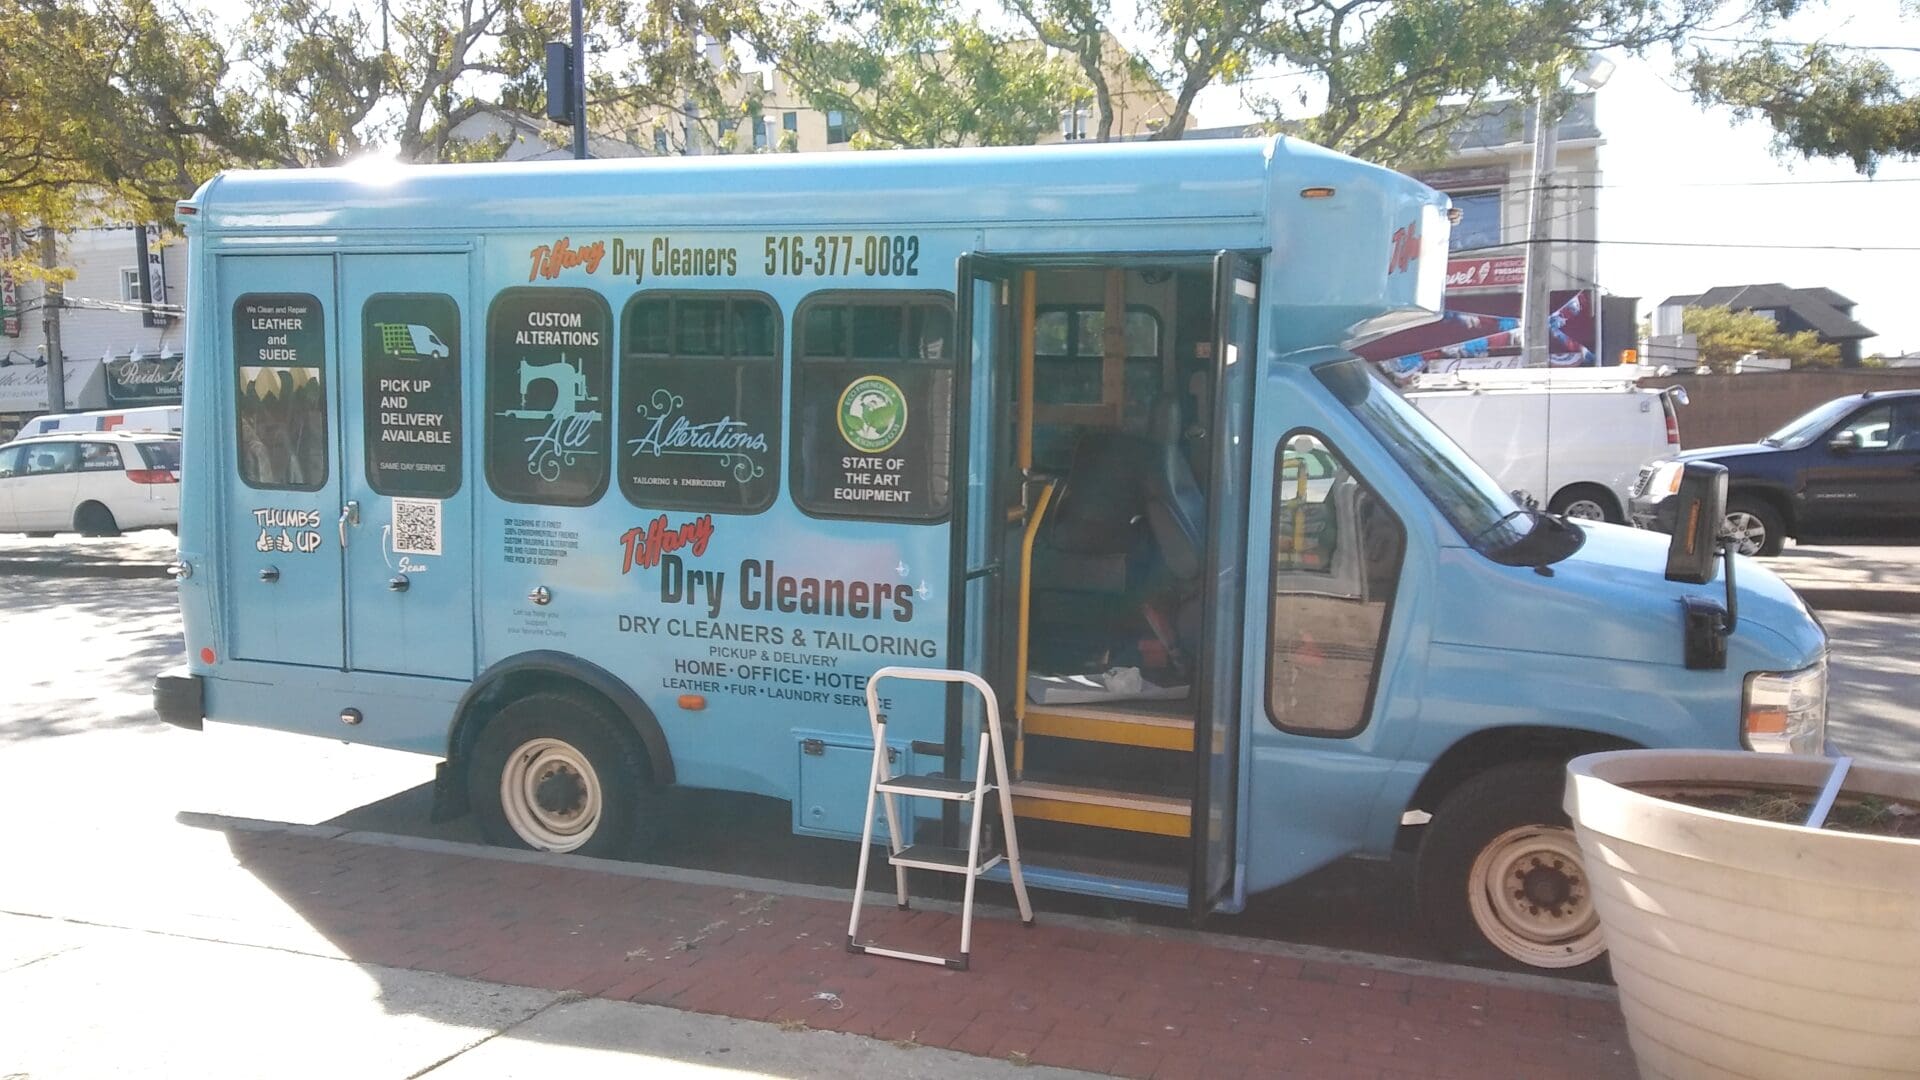 A blue mobile dry cleaning van parked on a street with its side door open, displaying various ADP USA Solutions Gallery advertisements.